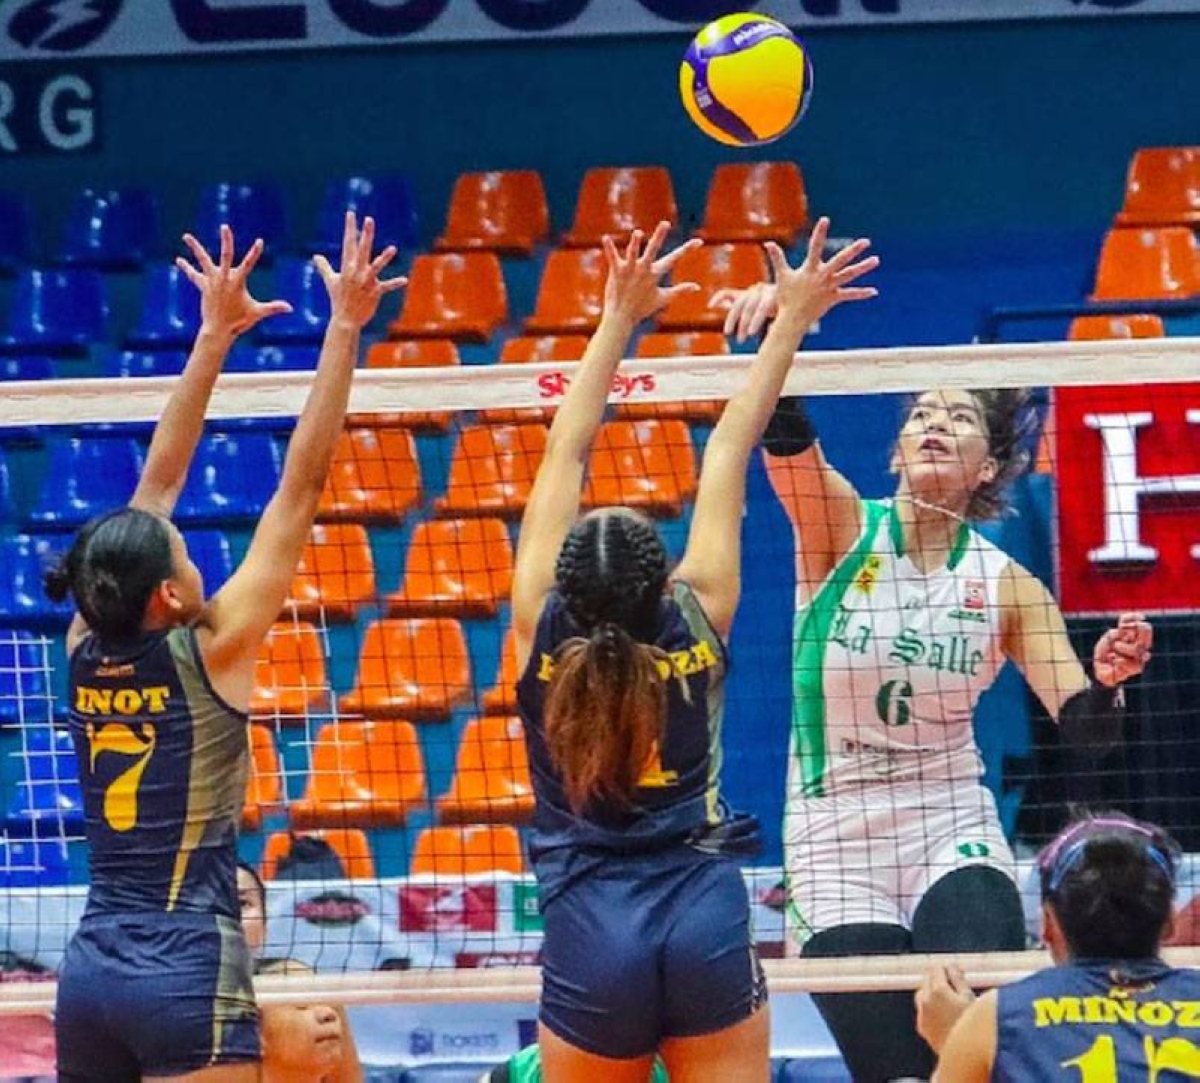 La Salle’s Alleiah Malaluan attacks against two University of Southern Philippines Foundation blockers during the 2023 Shakey’s Super League National Invitationals on Tuesday, Aug. 1, 2023, at the Filoil EcoOil Centre. SSL PHOTO